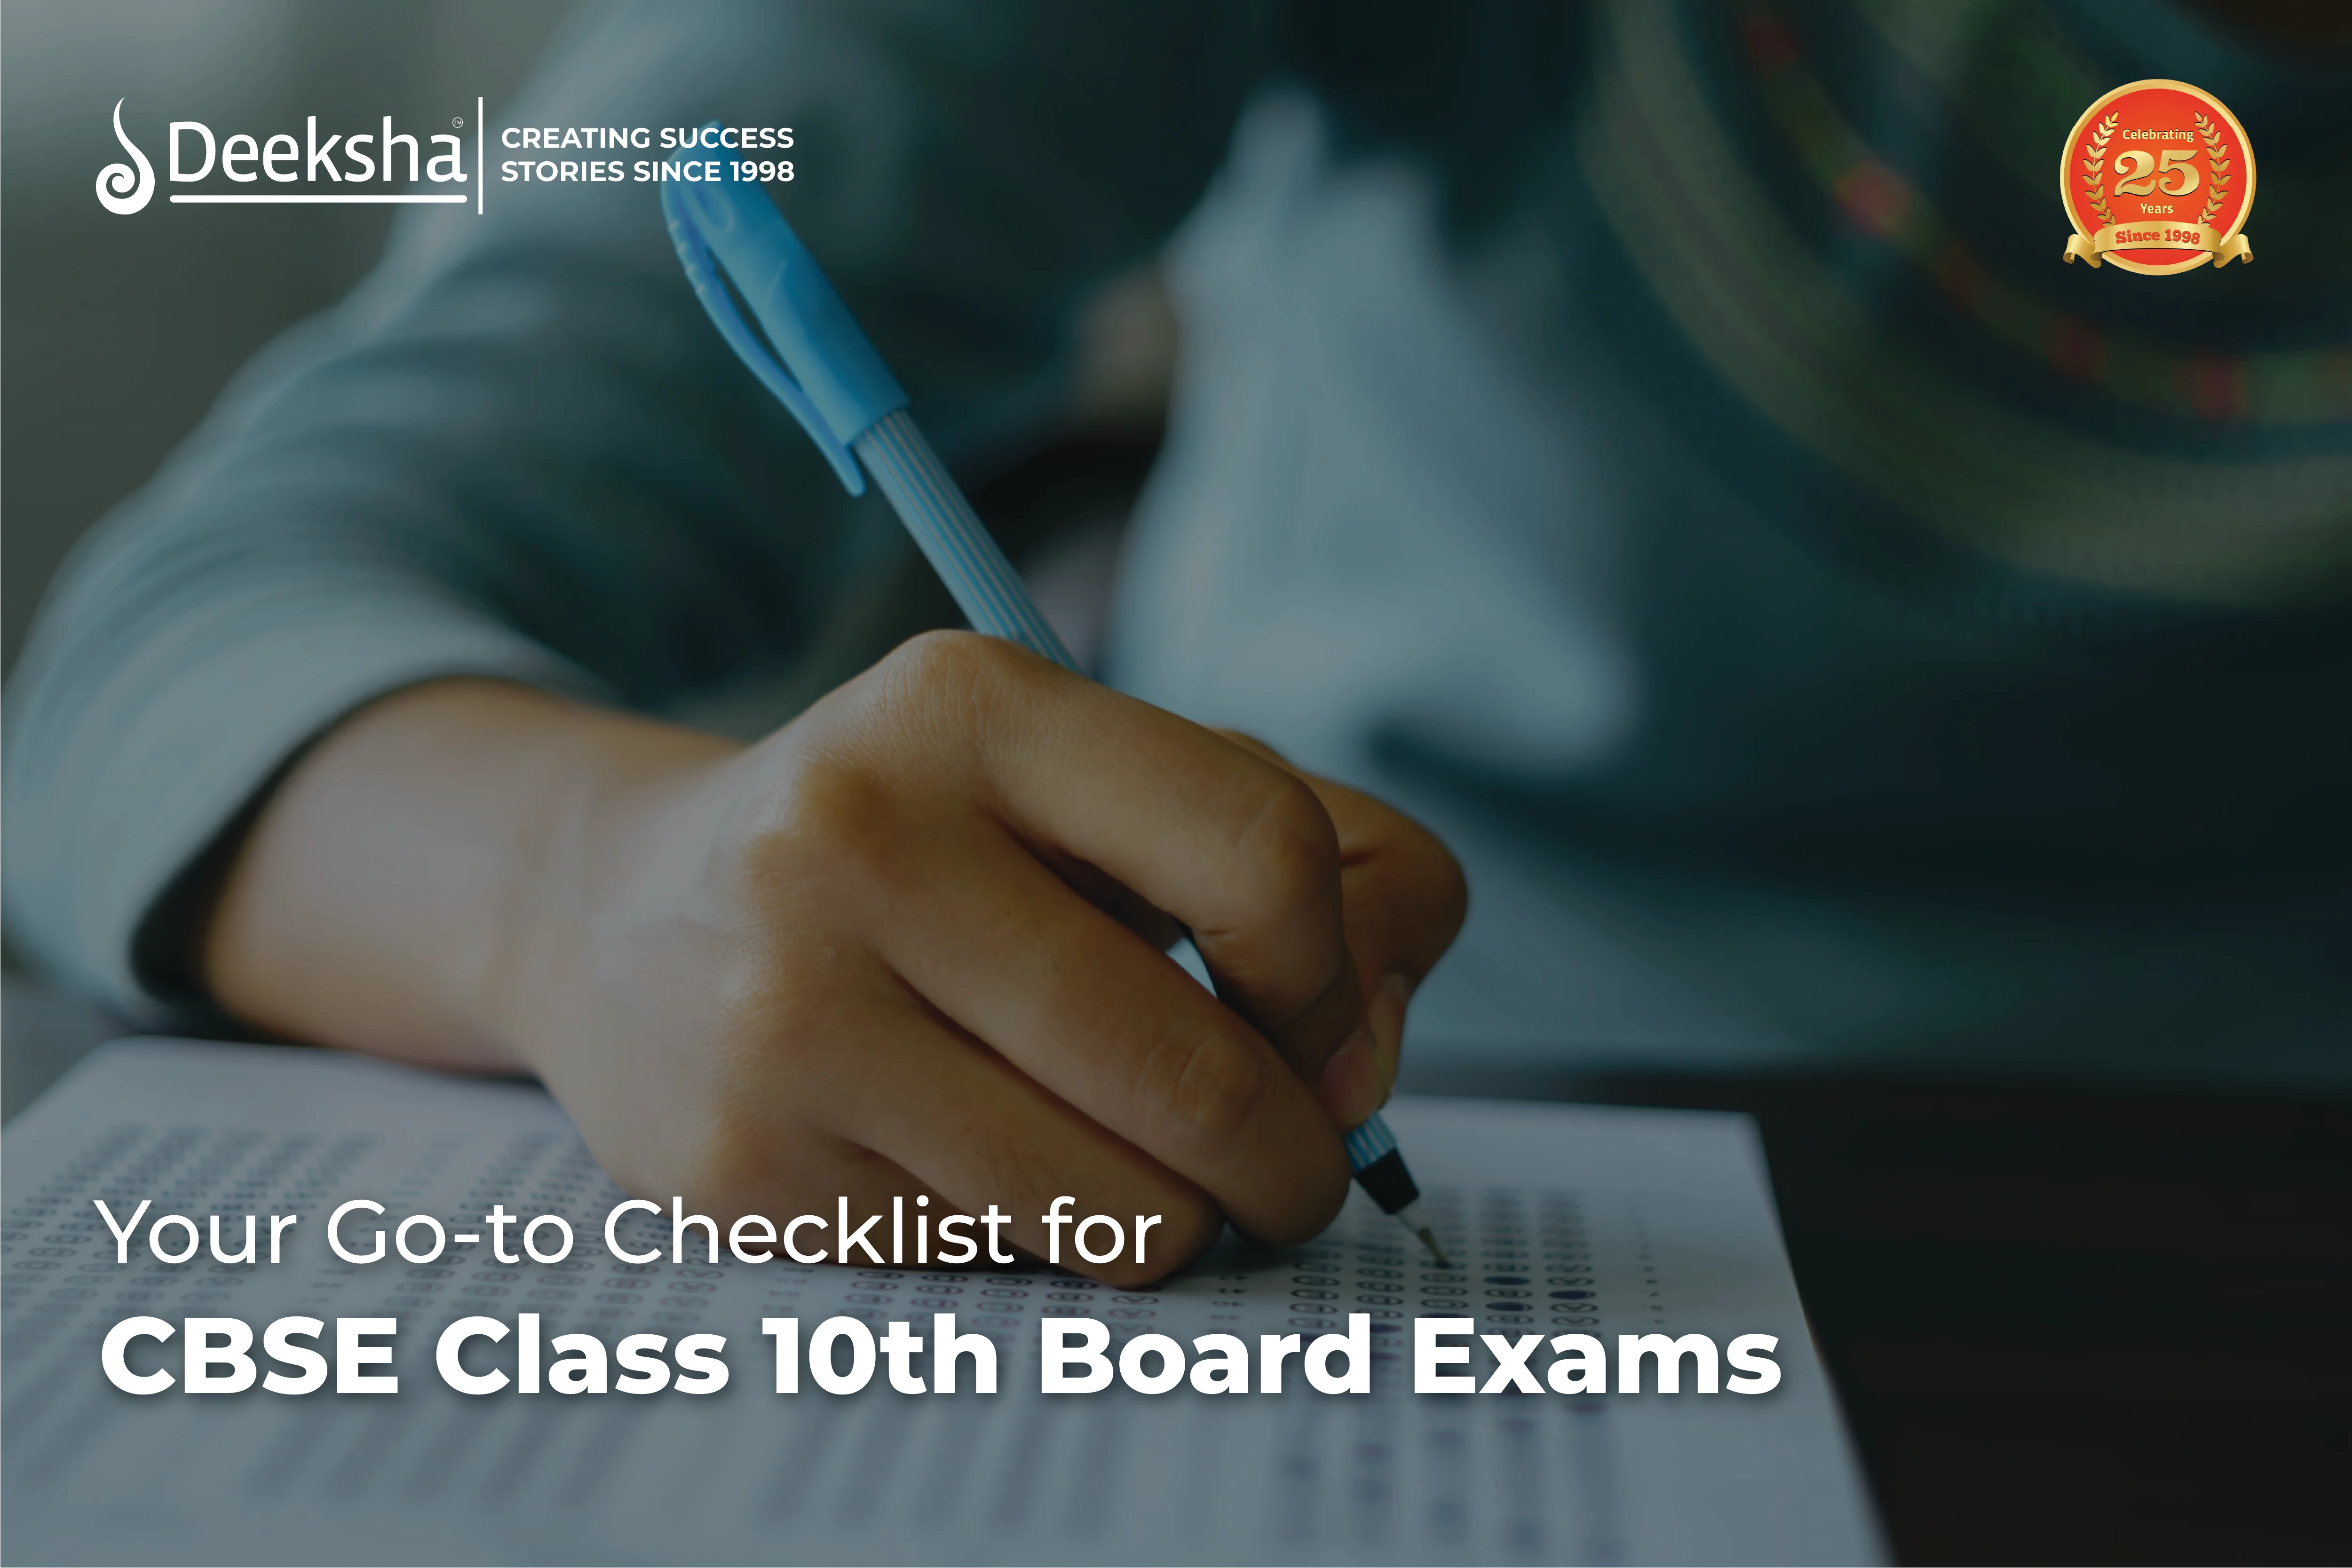 Your Go-to Checklist for CBSE Class 10th Board Exams